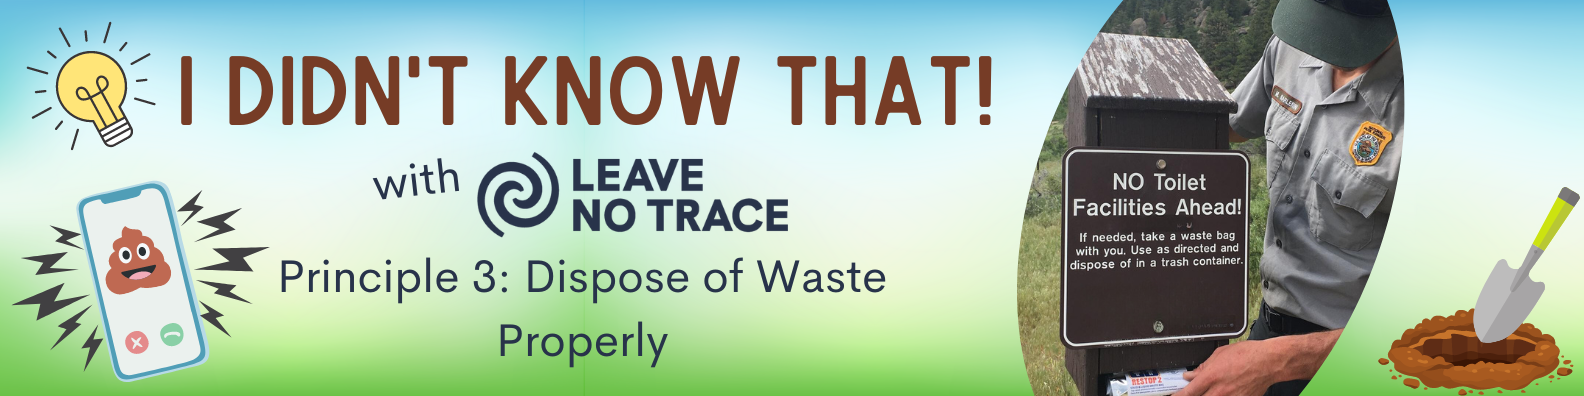 Article banner for I Didn't Know That! with Leave No Trace Principle 3 Dispose of Waste Properly with an image that features a ranger taking a WAG bag out of a dispenser that says "no toilet facilities ahead"